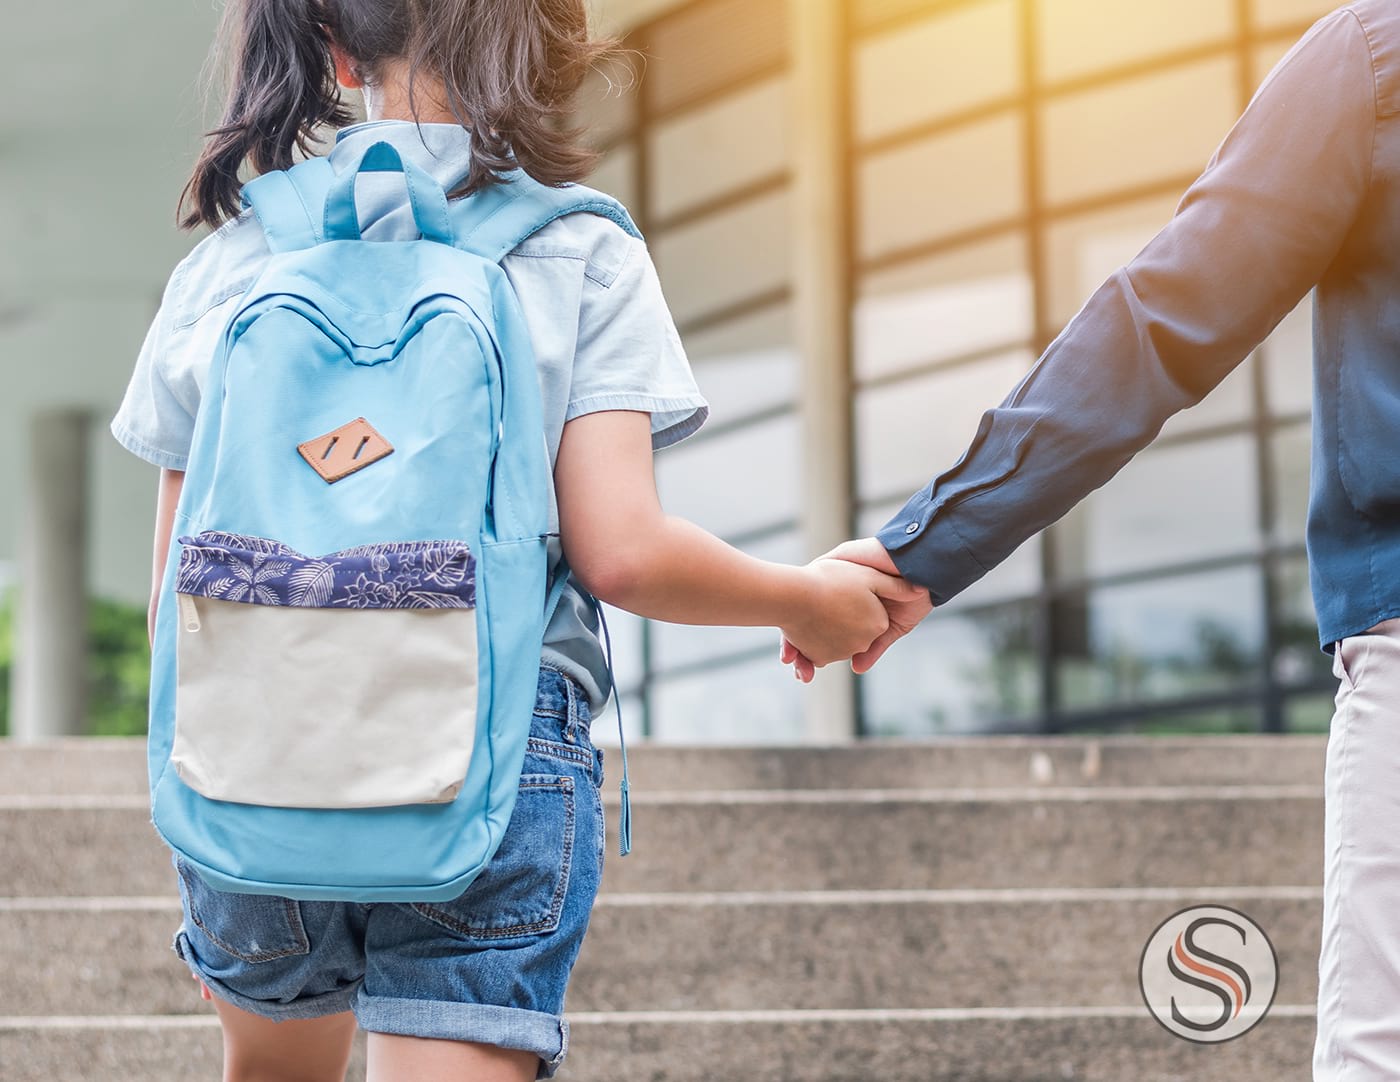 Divorced father walking daughter to school